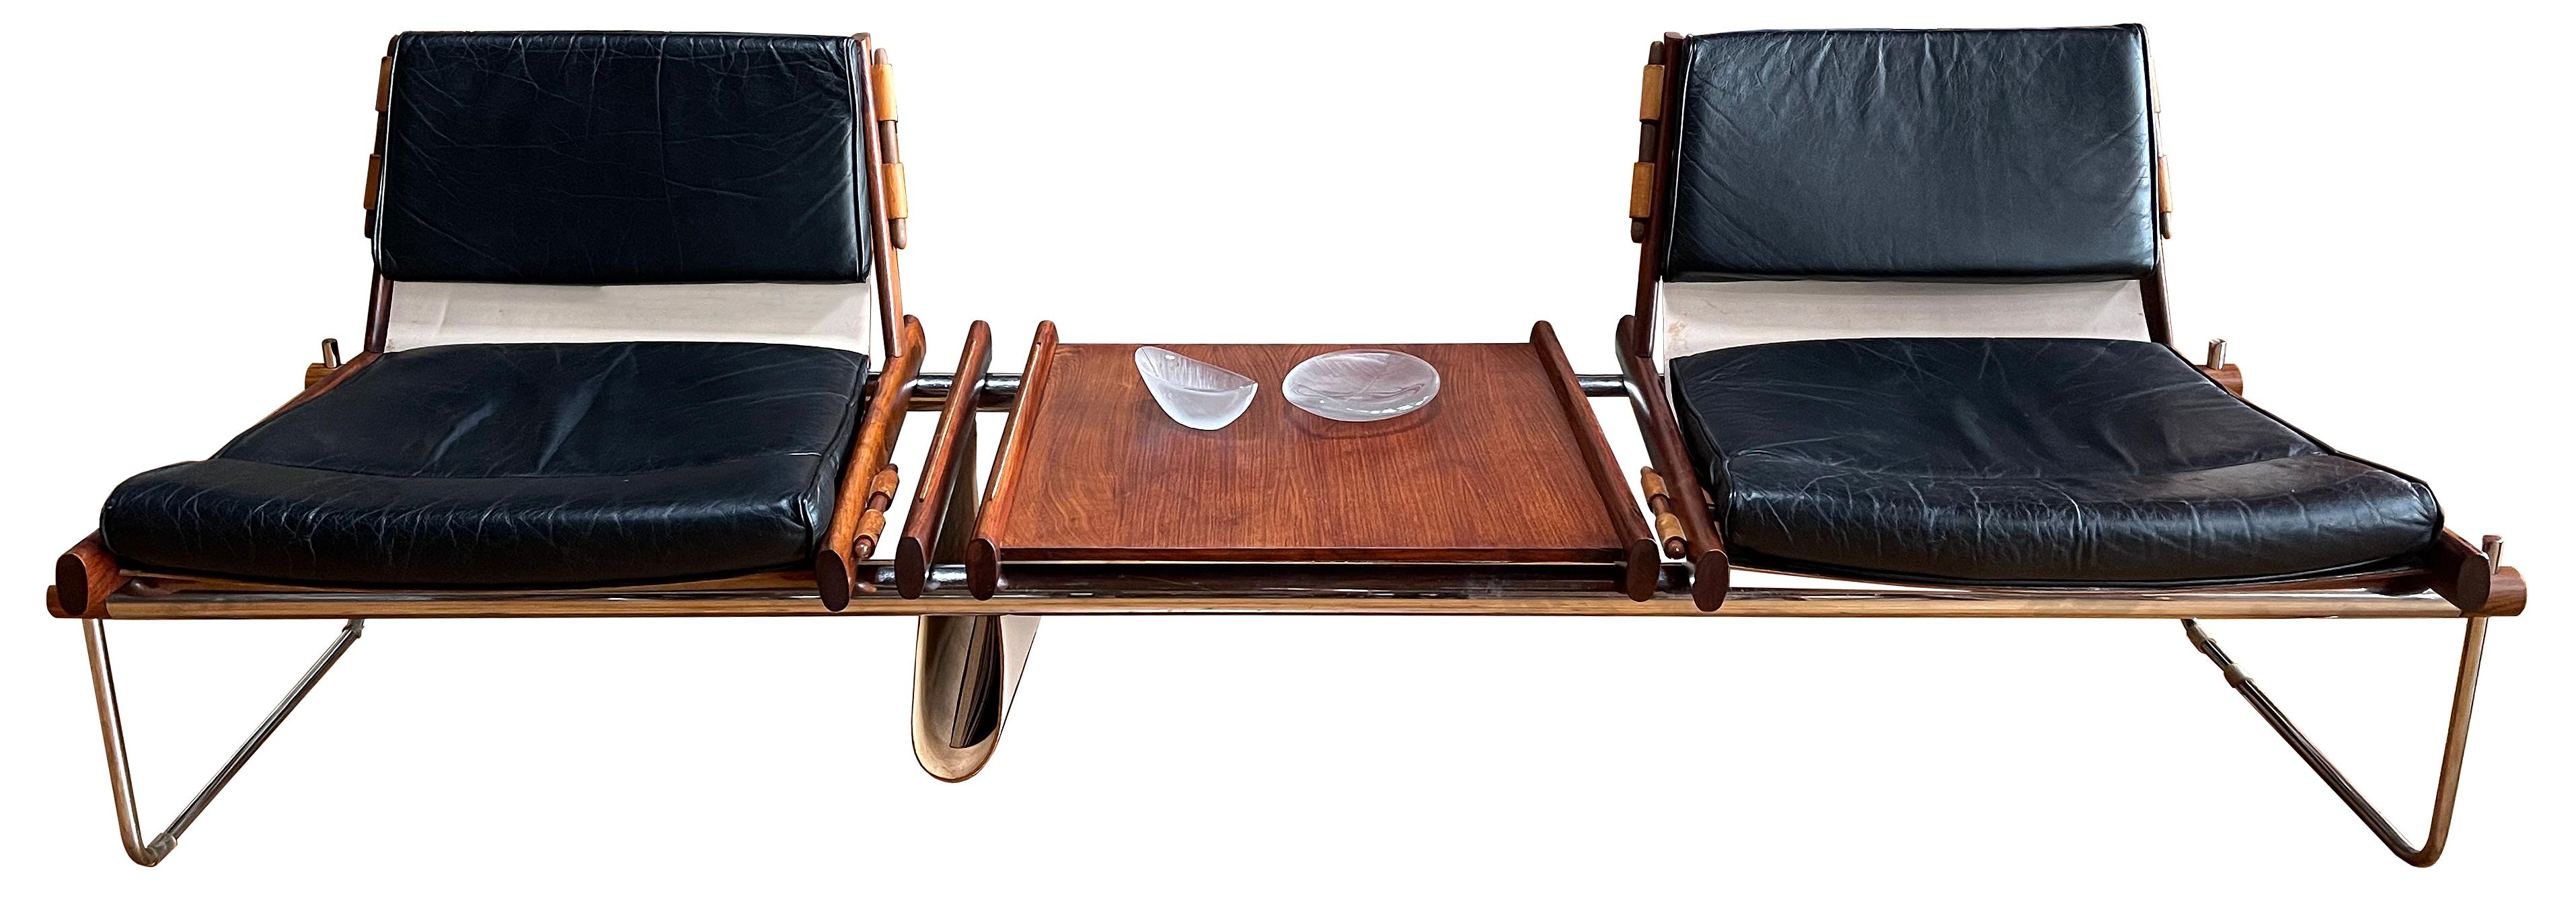 One of Percival Lafer's most desirable pieces. 

A MP-123 Modular seating unit. This example in brazilian rosewood with original leather and polished stainless steel . 

Seating elements and table/magazine rack are modular and can be configured